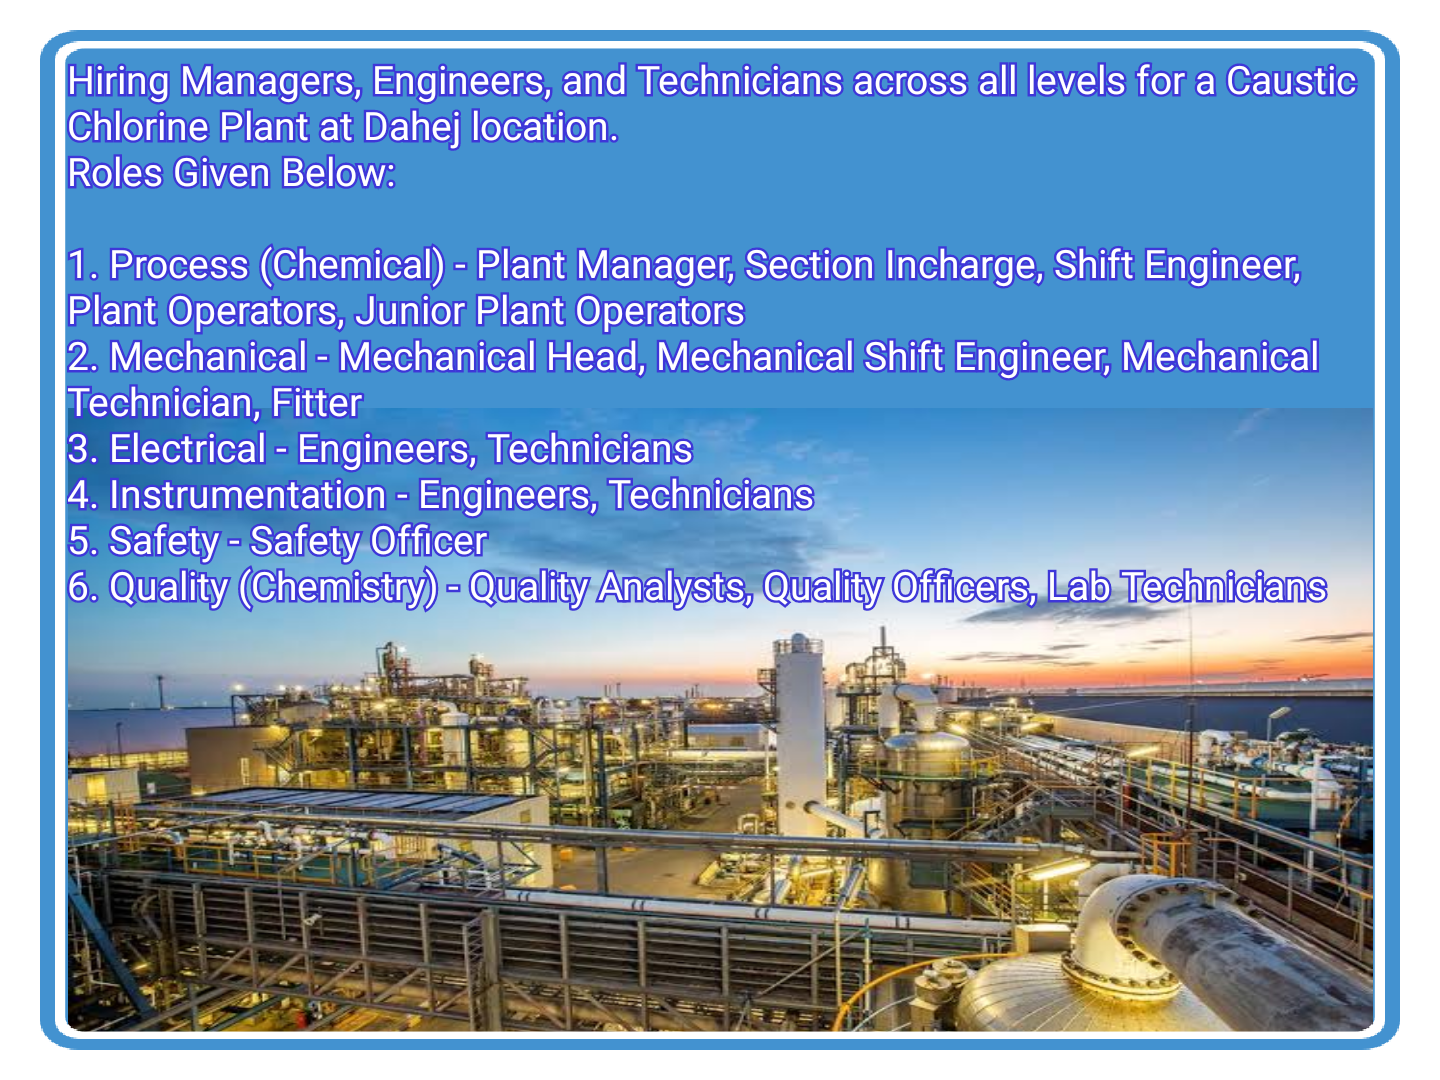 Process, Mechanical, Electrical, Instrument, Safety Officer & Quality Engineer Jobs